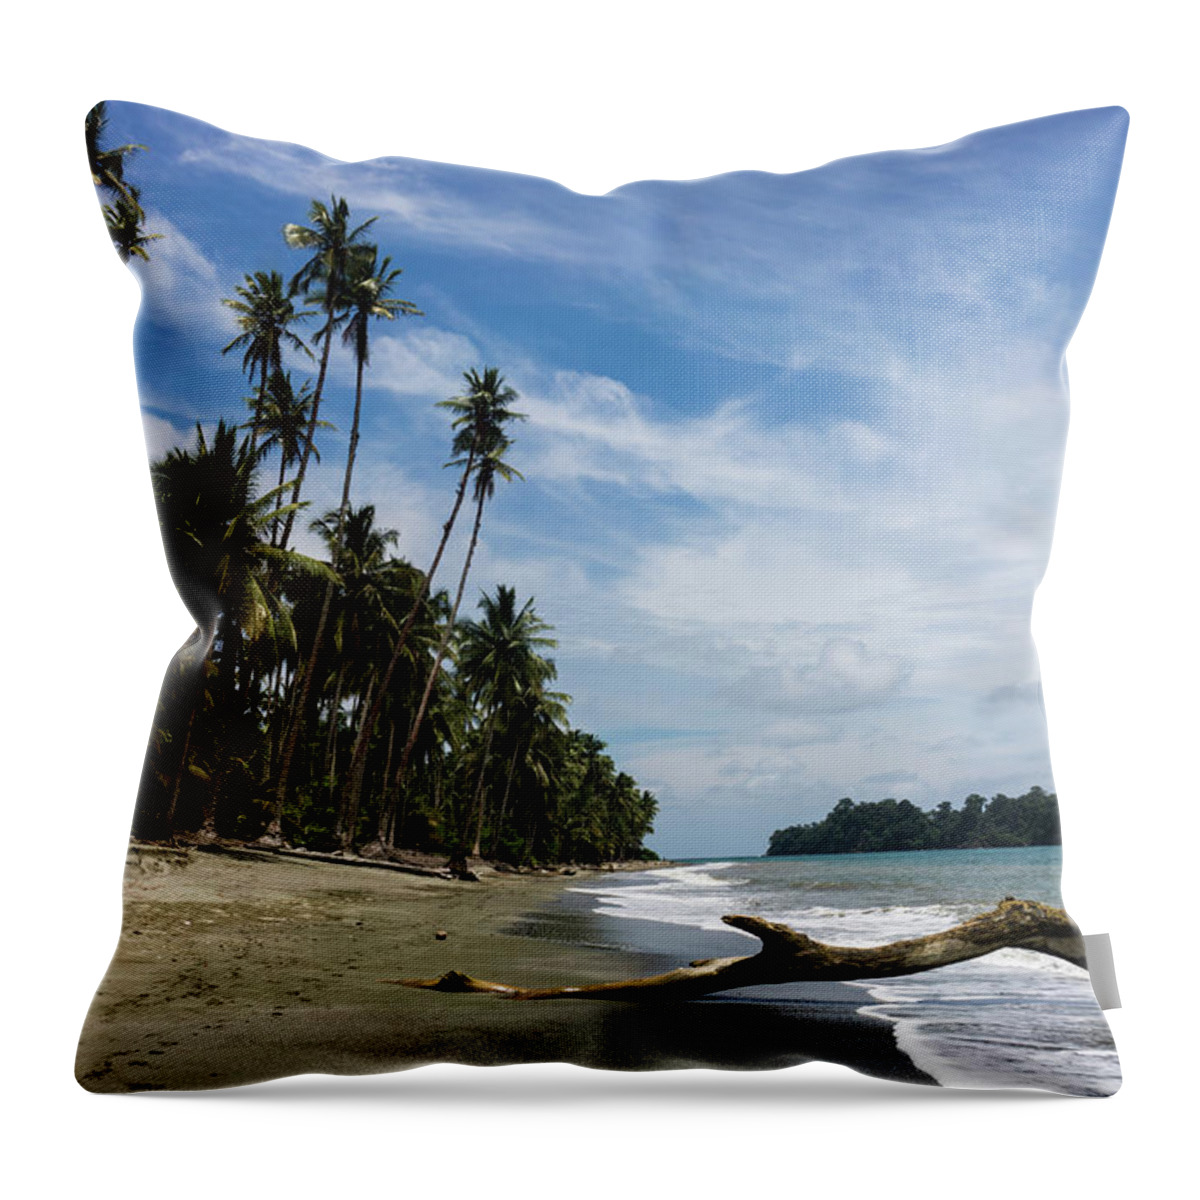 Tranquility Throw Pillow featuring the photograph Palmira Beach by Cedric Favero